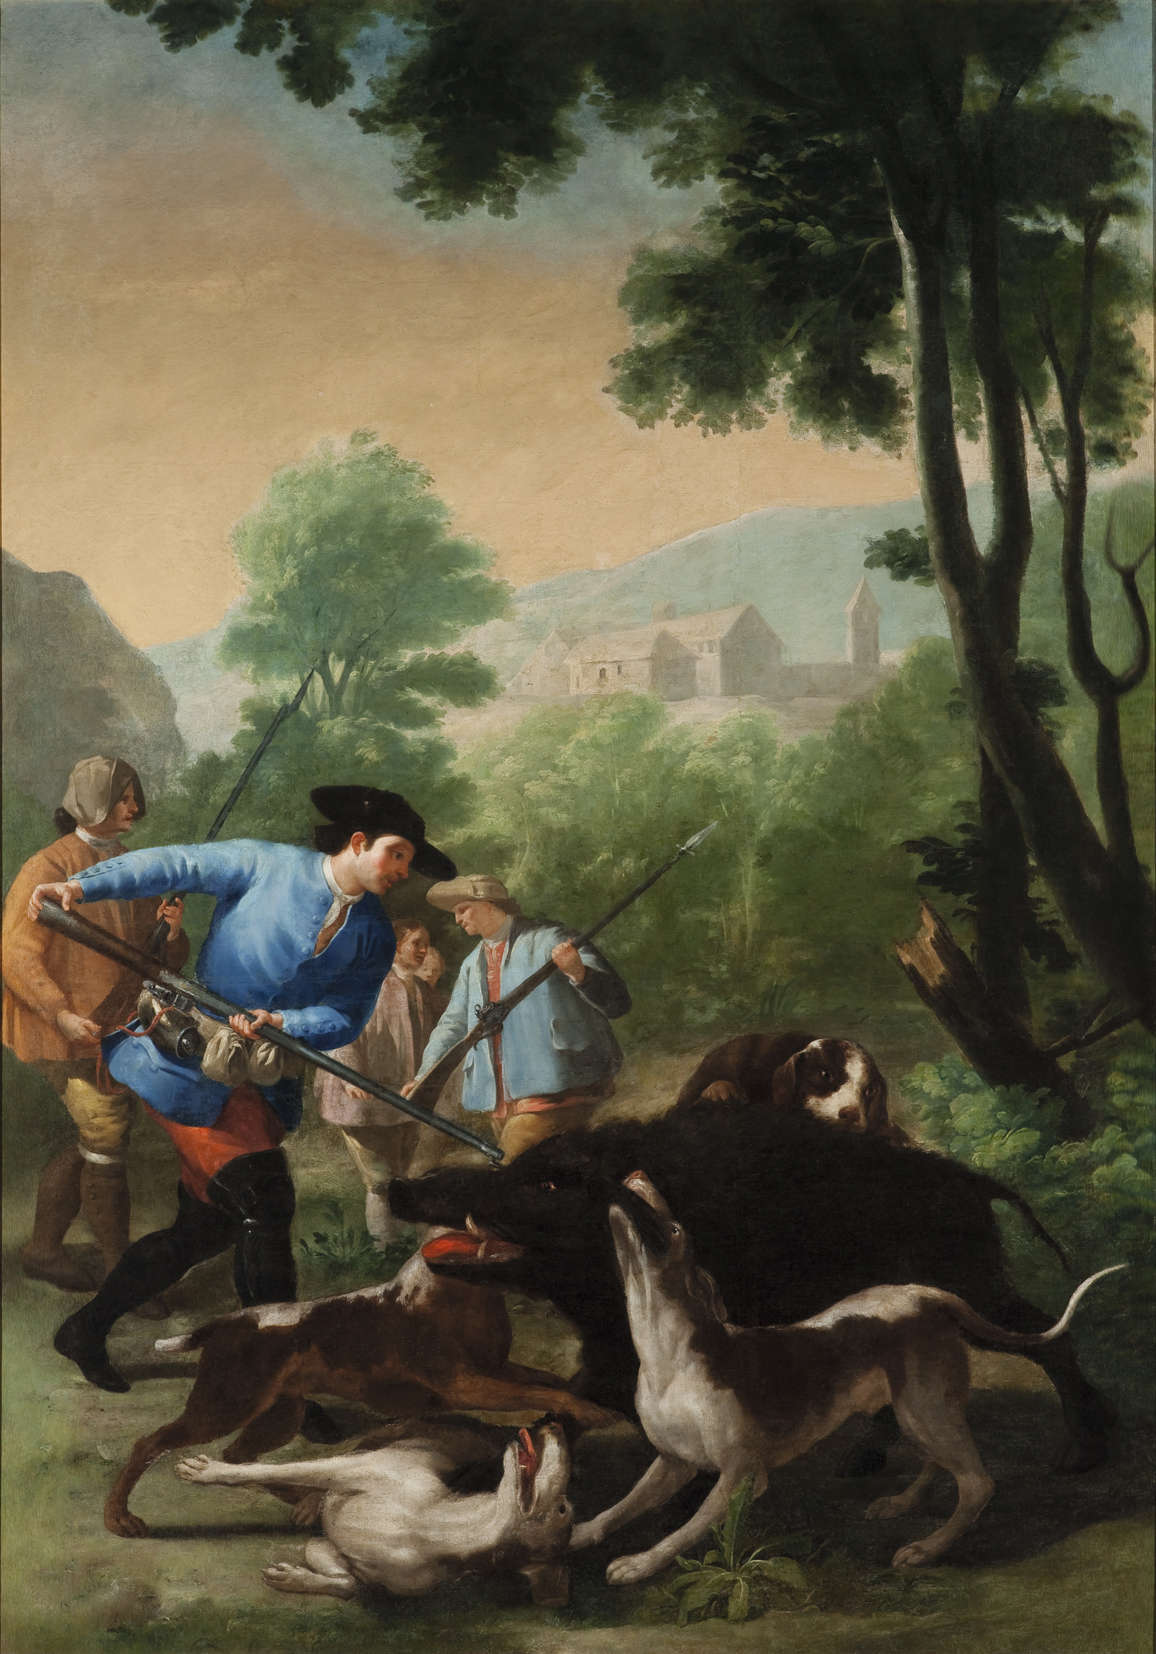 Francisco Goya, The Boar Hunt (1775; oil on canvas, 252 x 175 cm; Madrid, Royal Collections Gallery)